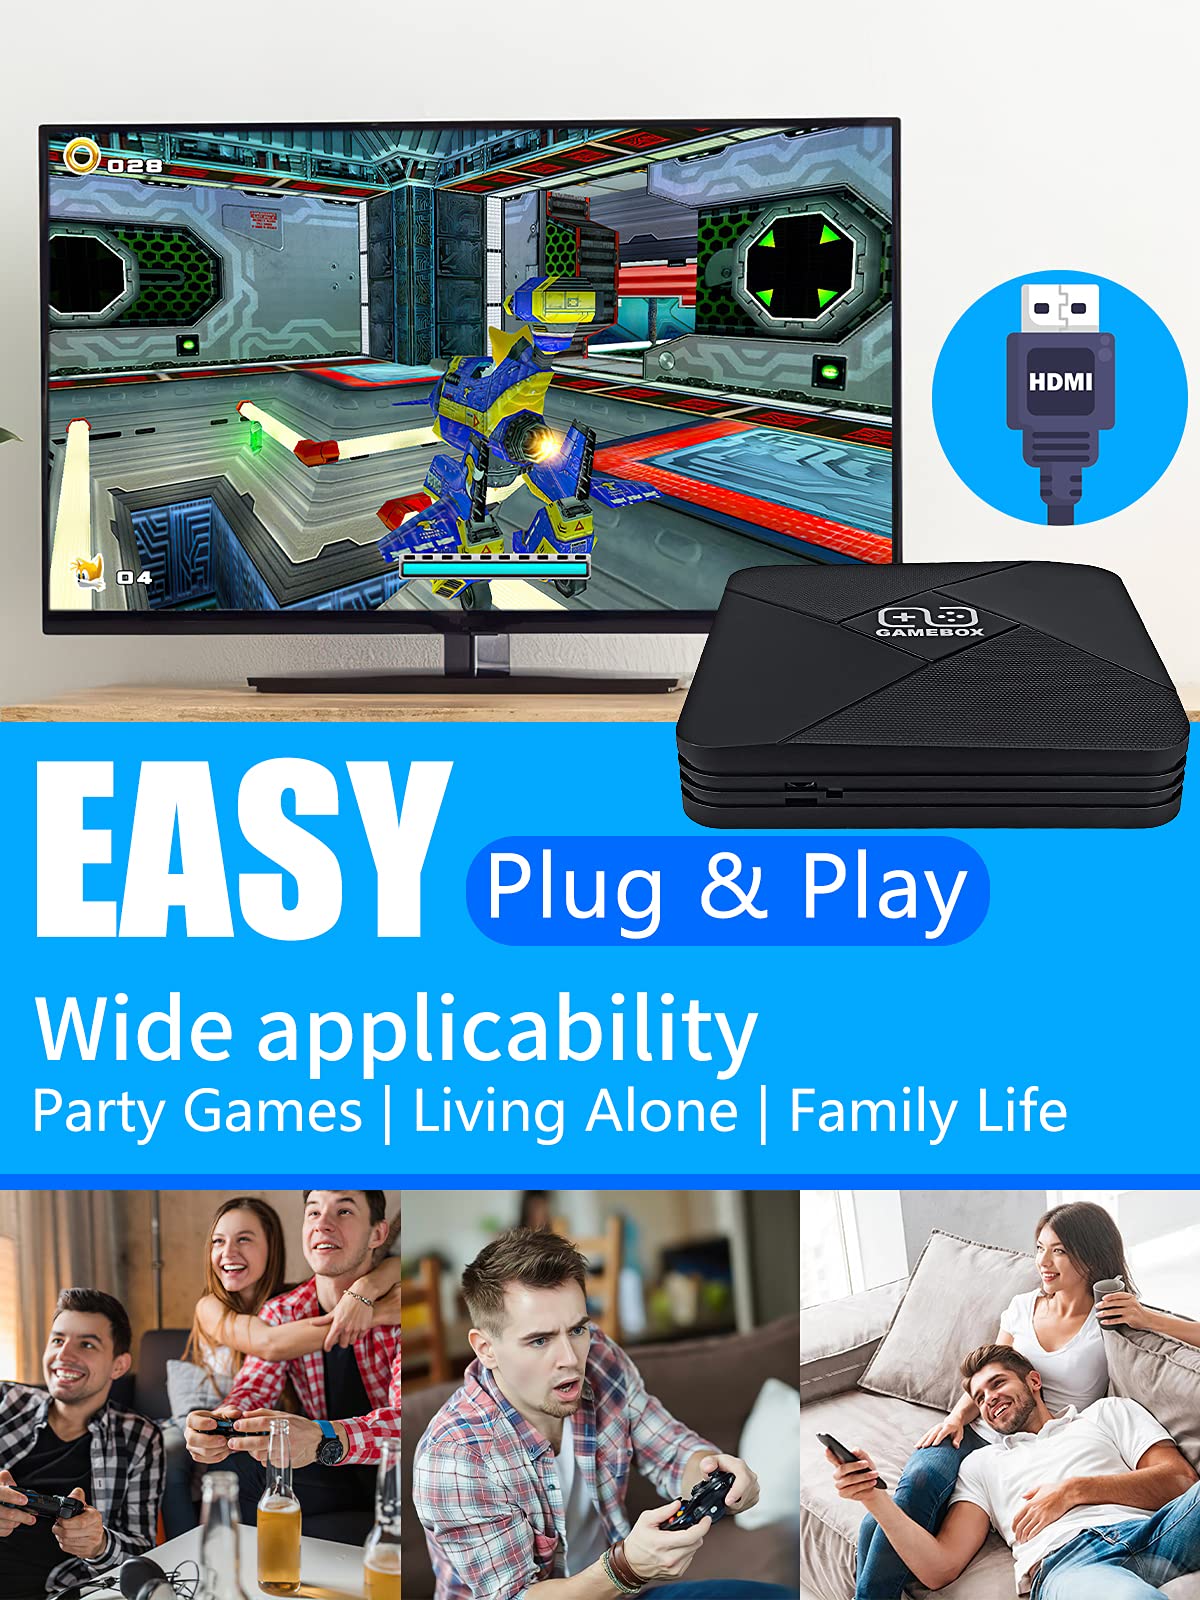 Fadist Super Console 64G, Retro Game Console/Android TV 2 in 1, Built in 30000+ Classic 2D/3D Video Games, 4K HD Output, Plug and Play, Suitable for Home, Party, Gift